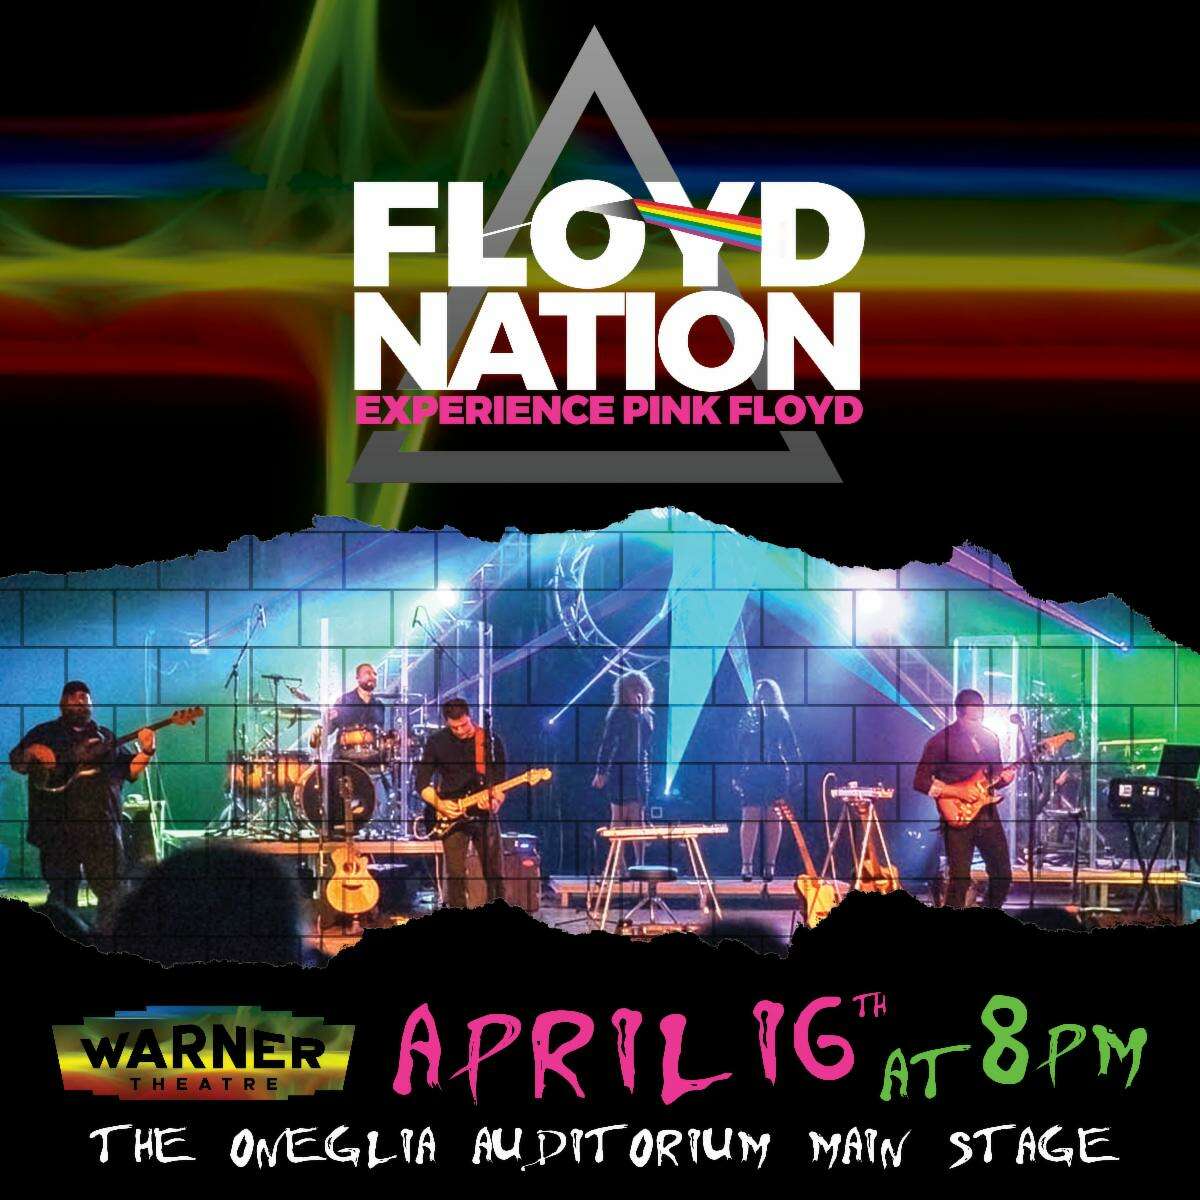 Floyd Nation, an American Pink Floyd tribute band, is coming to the Warner Theatre's main stage at 8 p.m. April 16. 